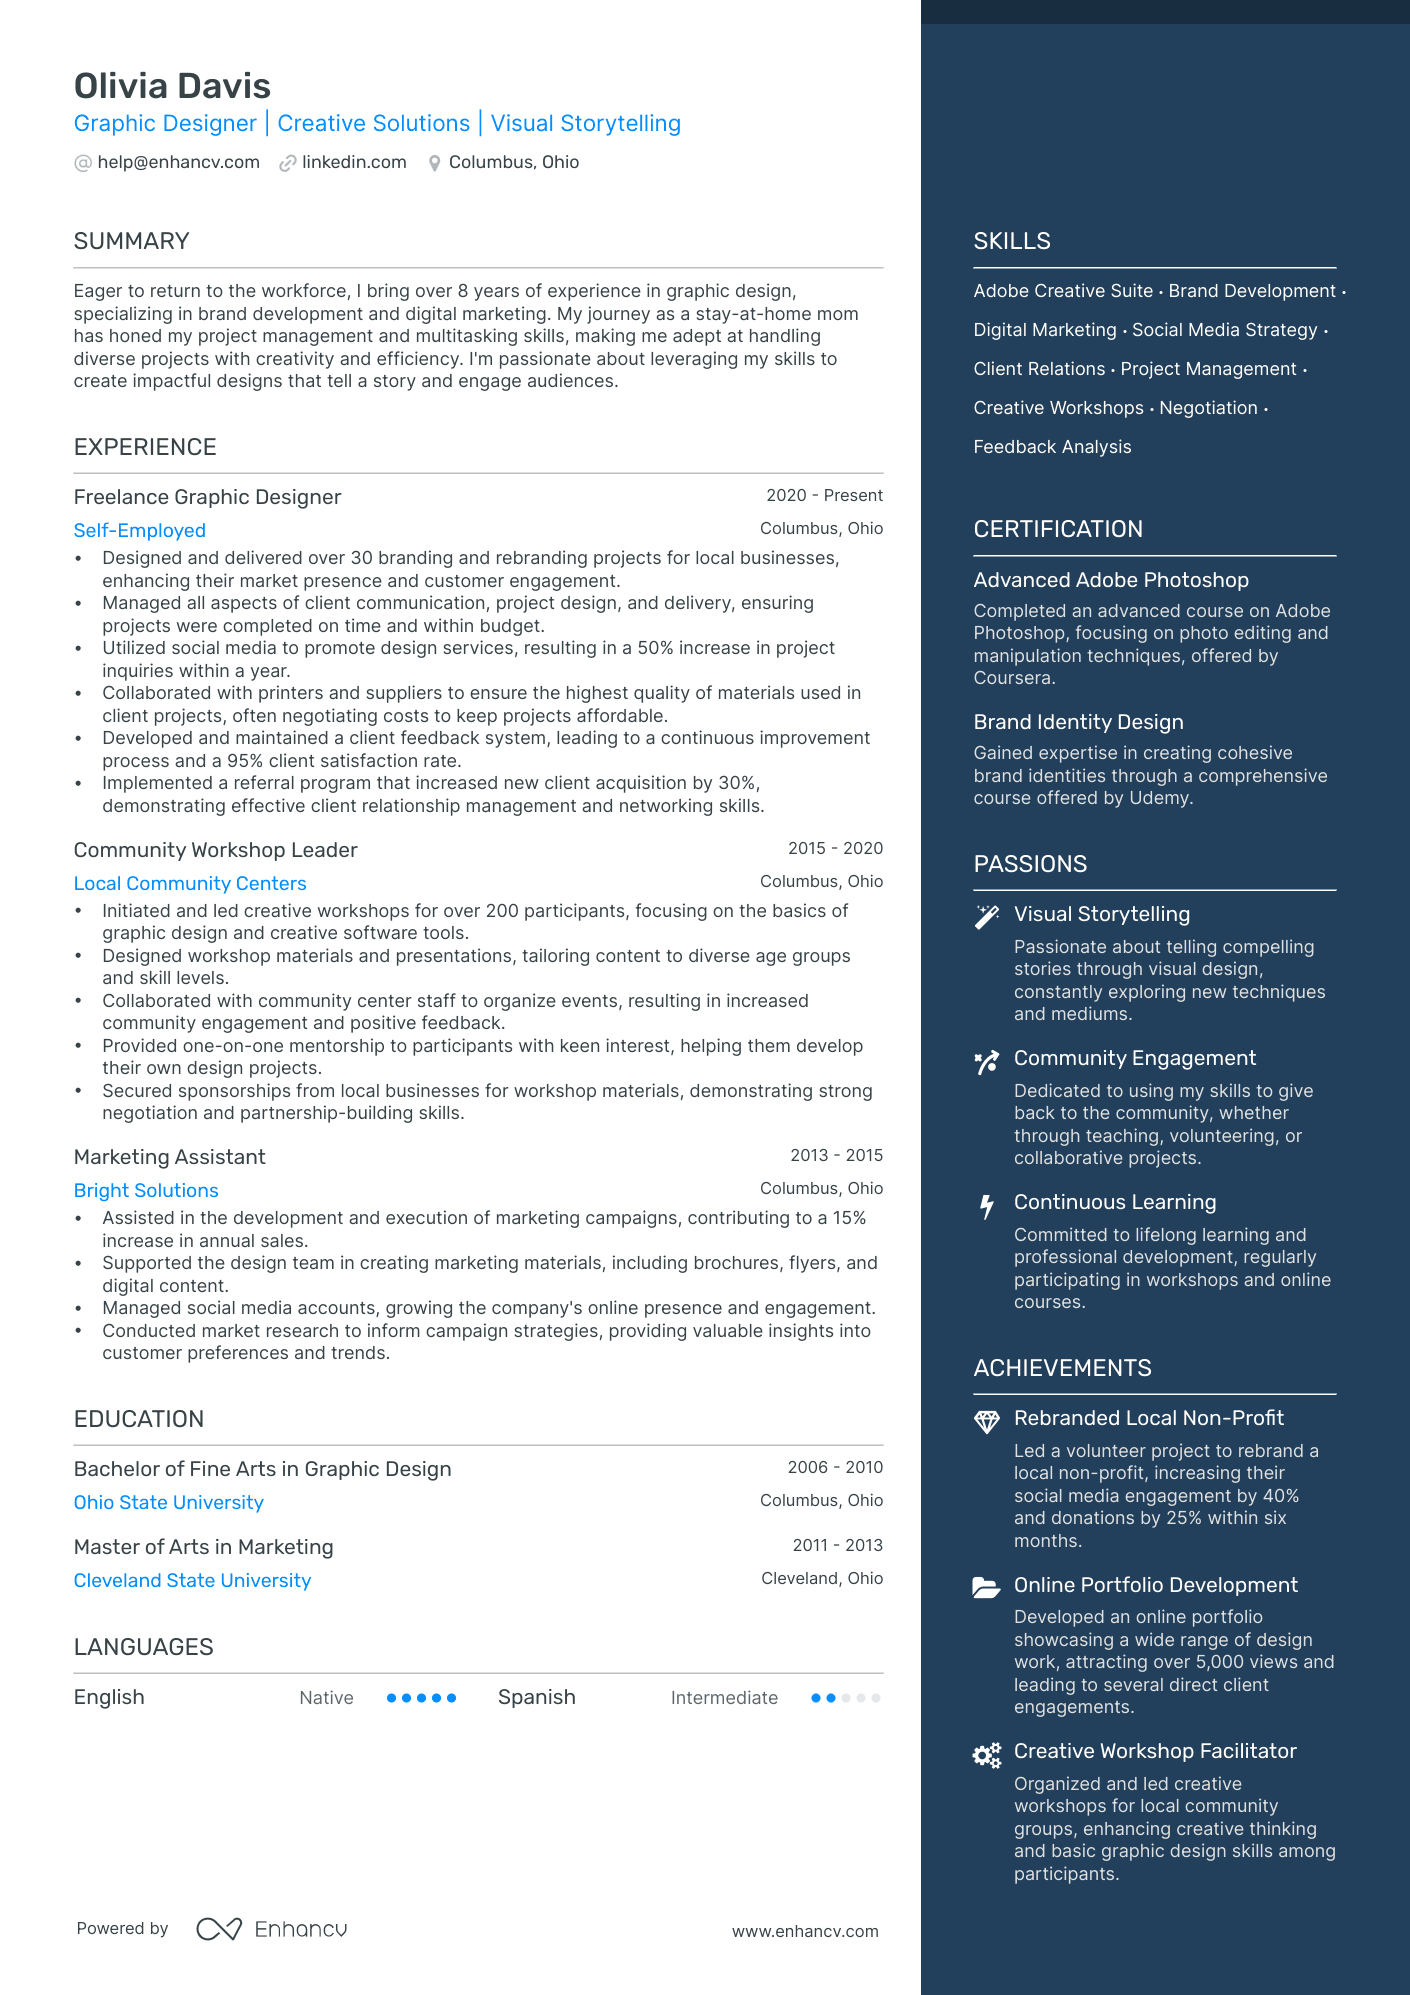 Stay at Home Mom resume example